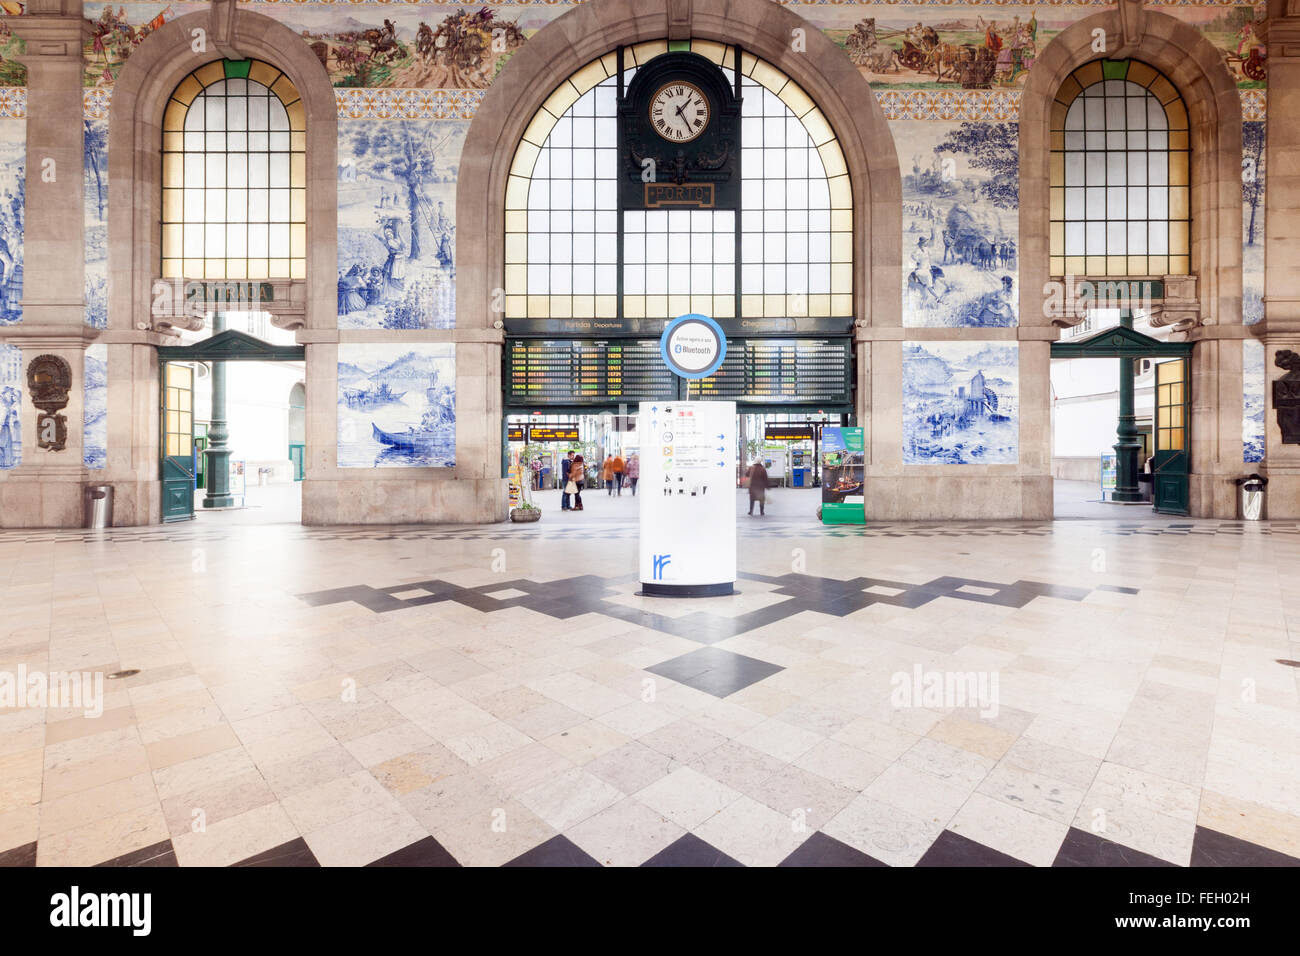 São Bento Railway Station is located in the city of Porto, in Portugal. Stock Photo